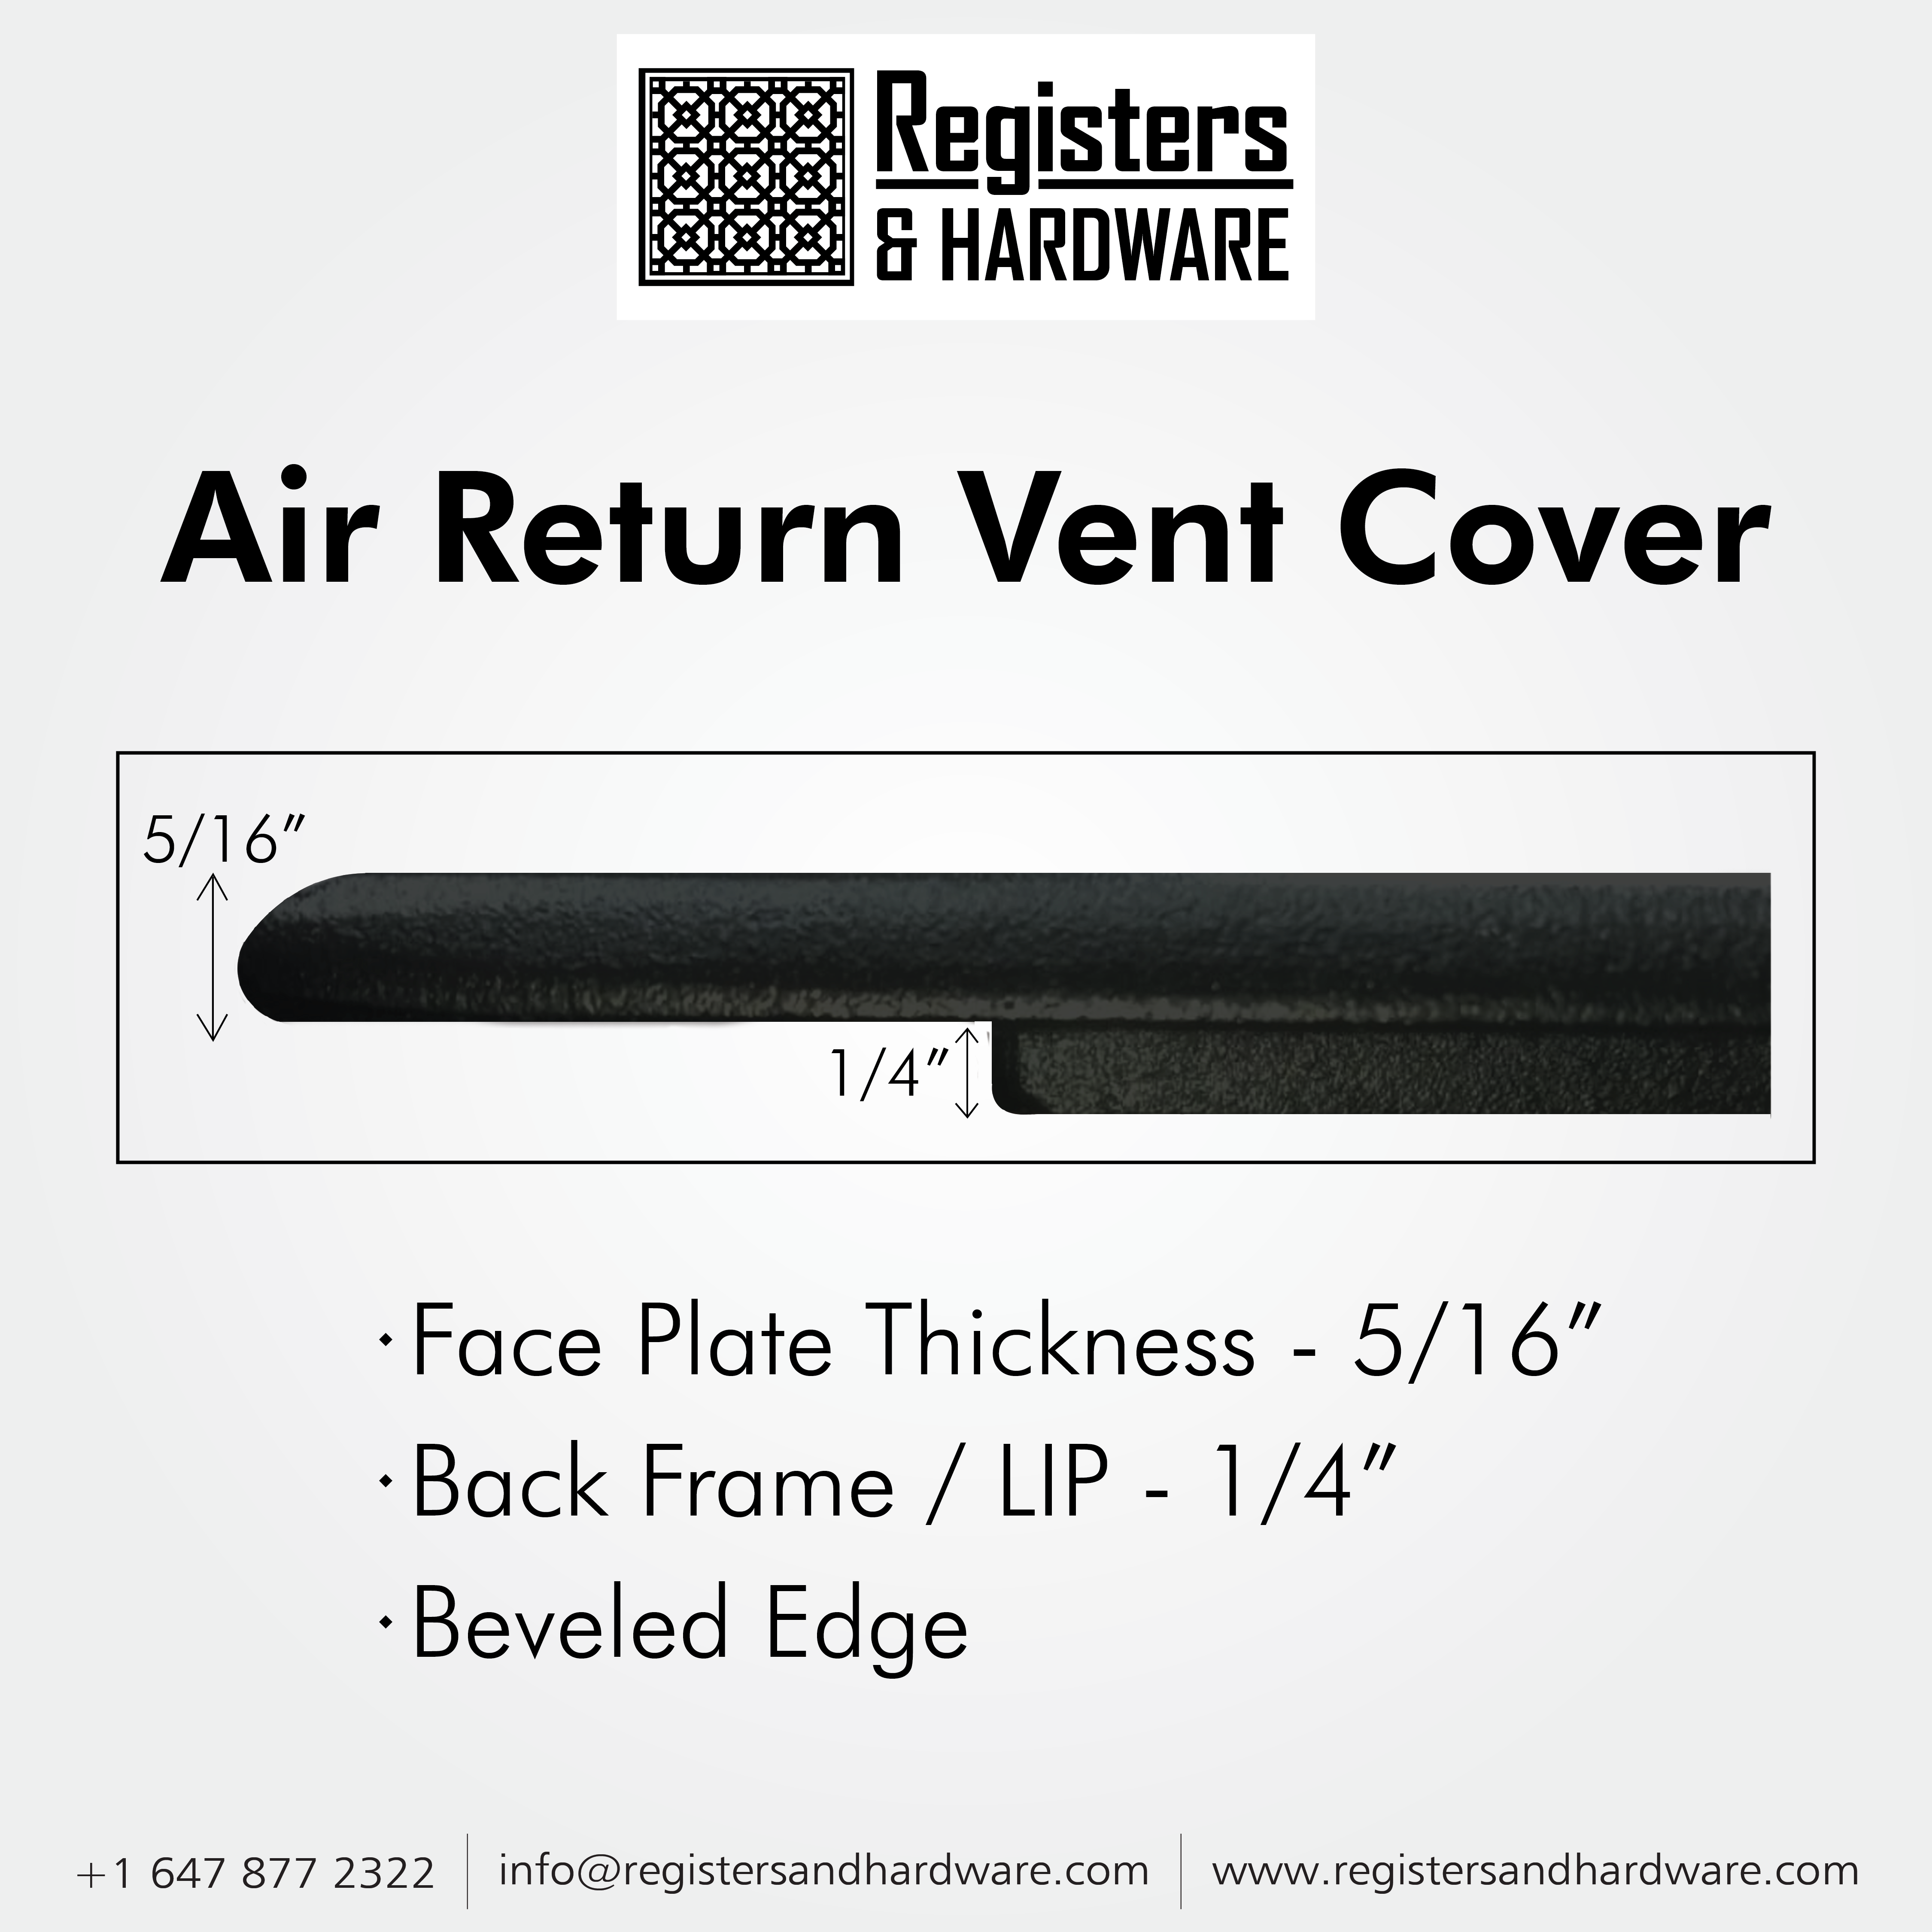 Achtek AIR RETURN 10"x22" Duct Opening (Overall Size 12"x24") | Heavy Cast Aluminum Air Grille HVAC Duct || Powder Coated